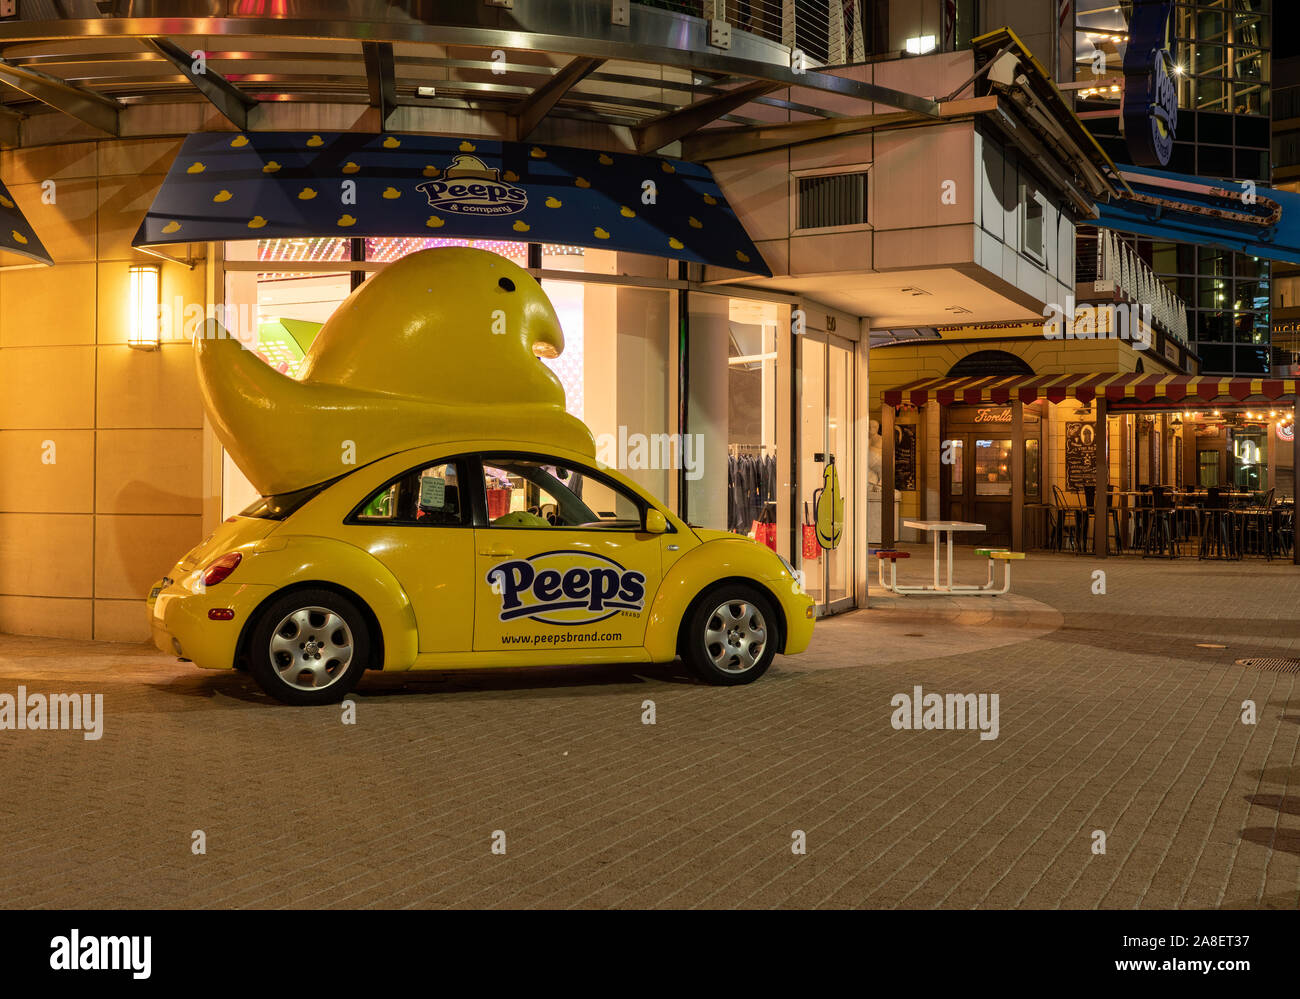 National Harbor, MD - 6 November 2019: Yellow Volkswagen Beetle car as brand for Peeps and Company near Washington DC Stock Photo